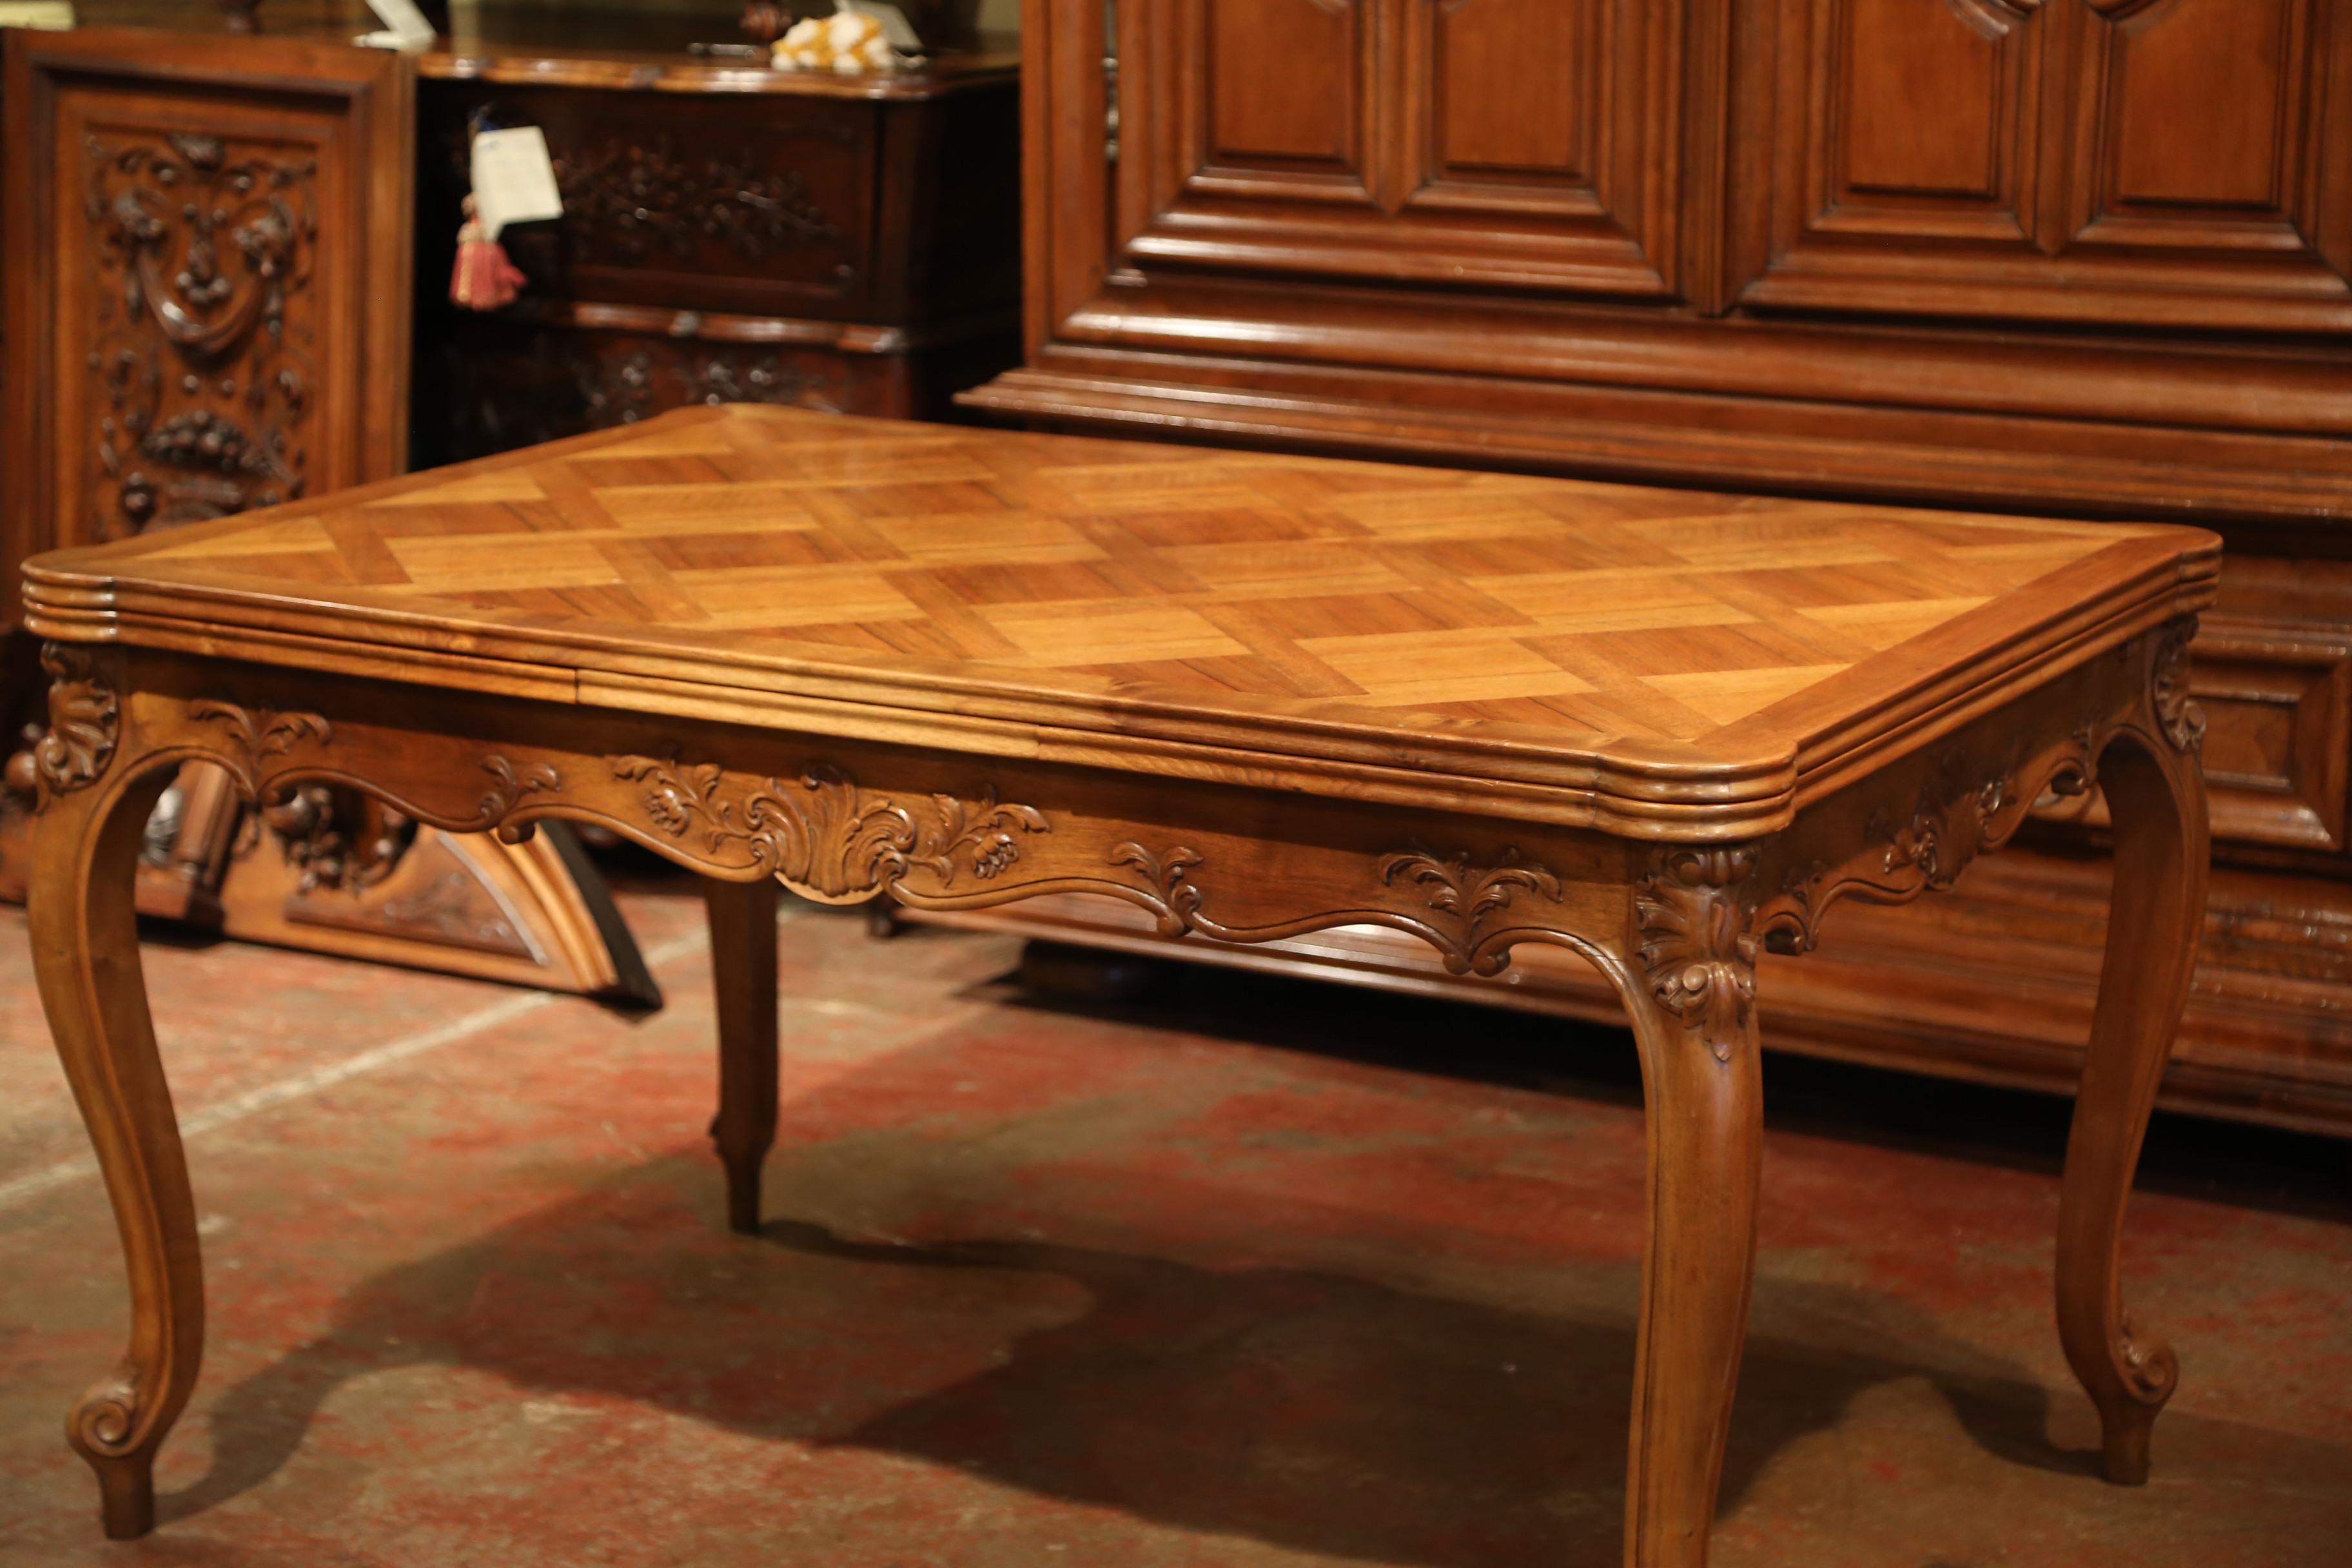 This elegant, antique dining table is a true eyecatcher! Crafted in Provence circa 1950, this fruitwood refectory table has four cabriole legs, a shaped apron with foliage motifs, and a parquetry top with beautiful, geometric details. Under the top